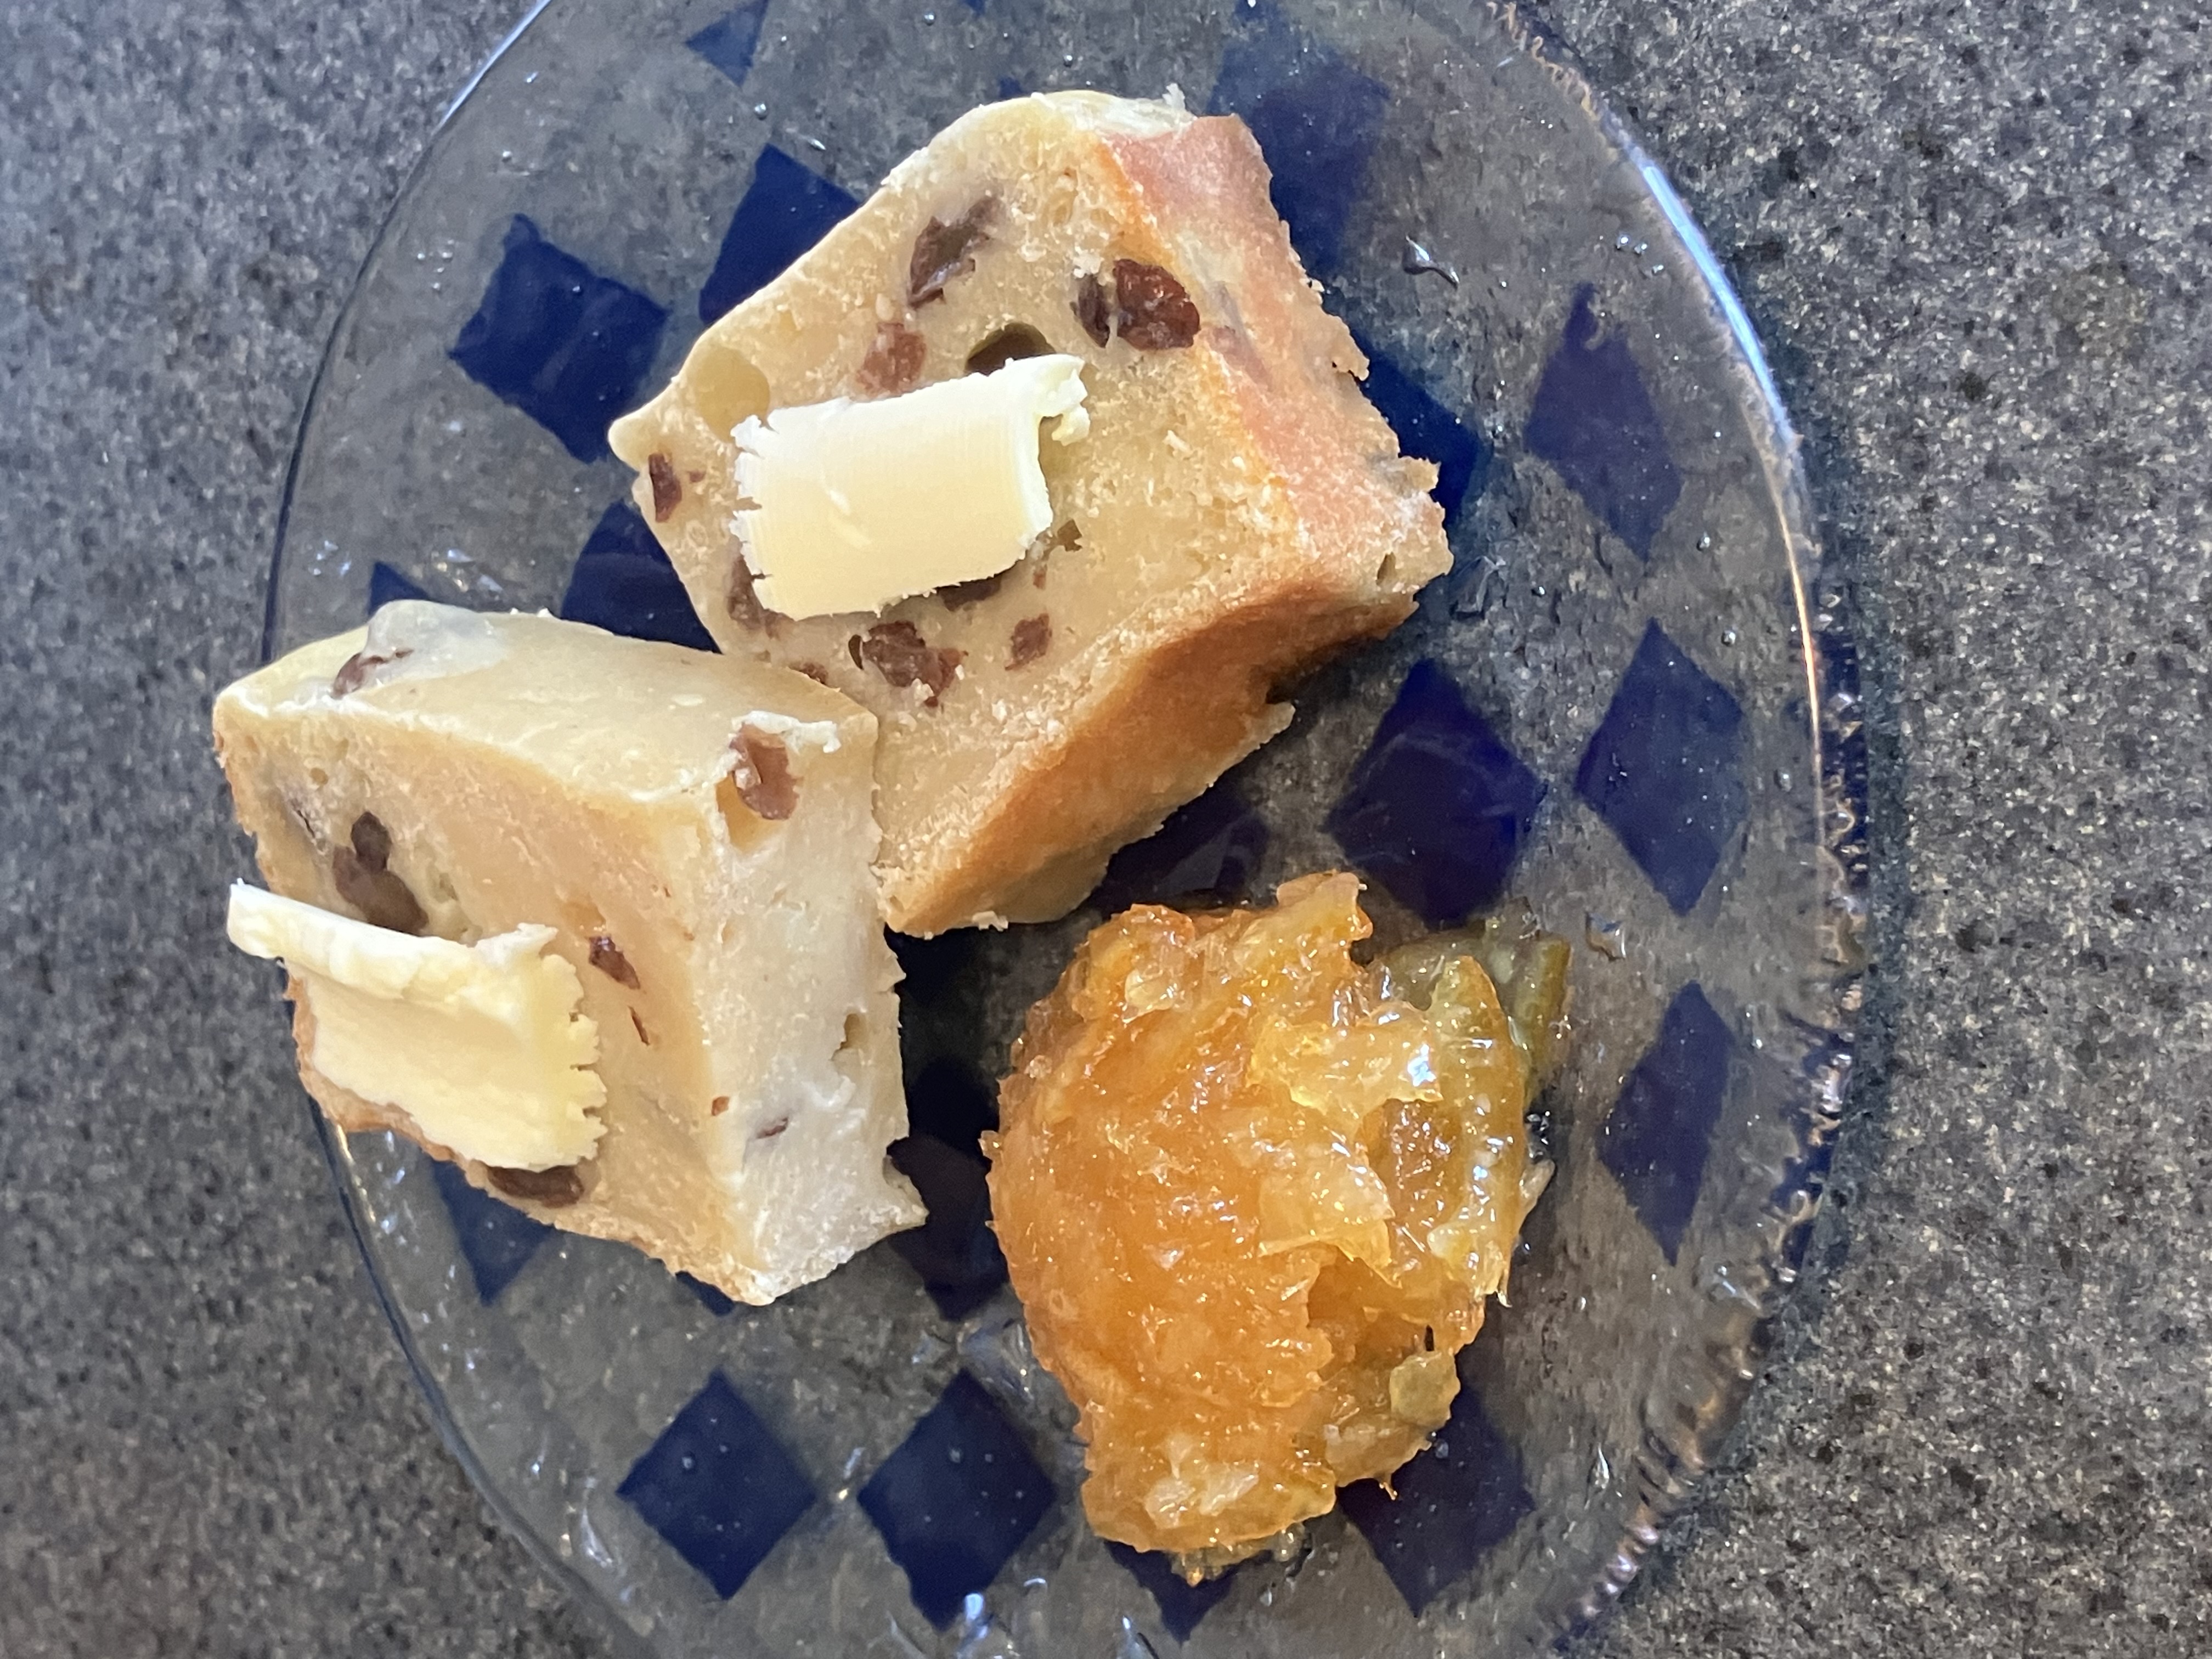 Square slice of baked Nameless cake with raisins with butter on top. There is some orange marmalade to the left of the slices.